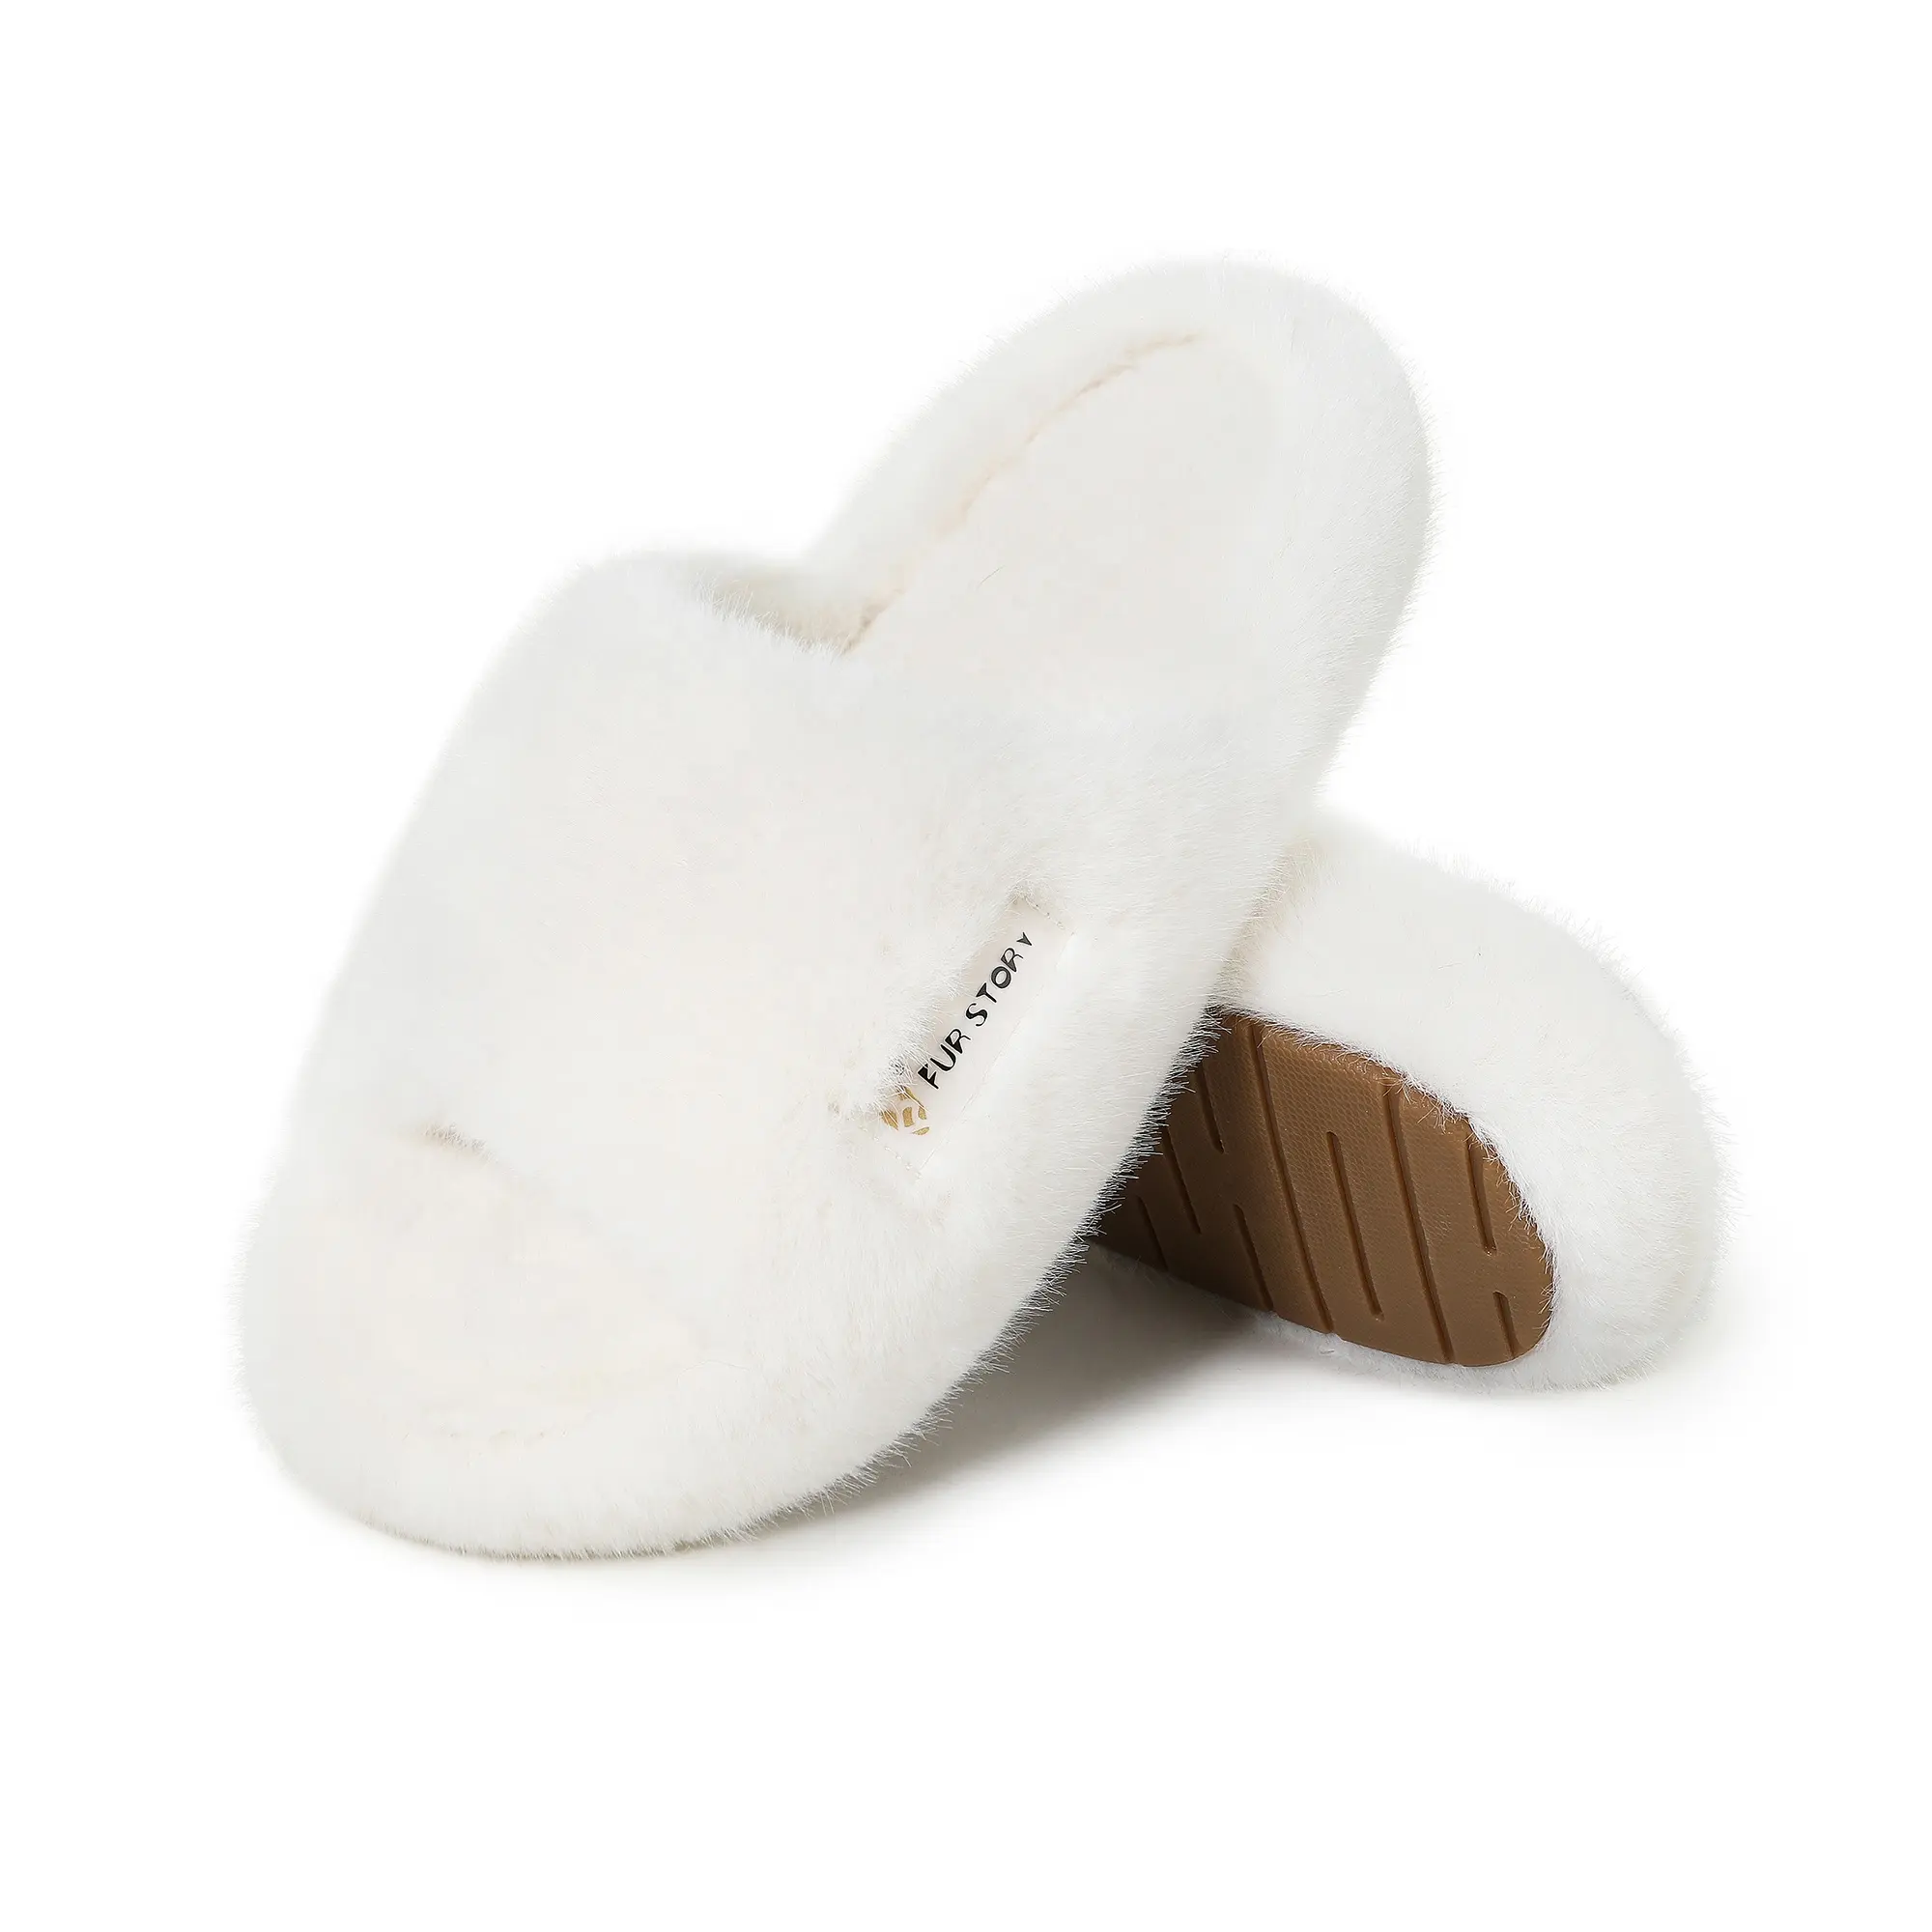 Women's Slippers Memory Foam House Bedroom Slippers for Women Fuzzy Plush Comfy Faux Fur Lined Slide Shoes Anti-Skid Sole